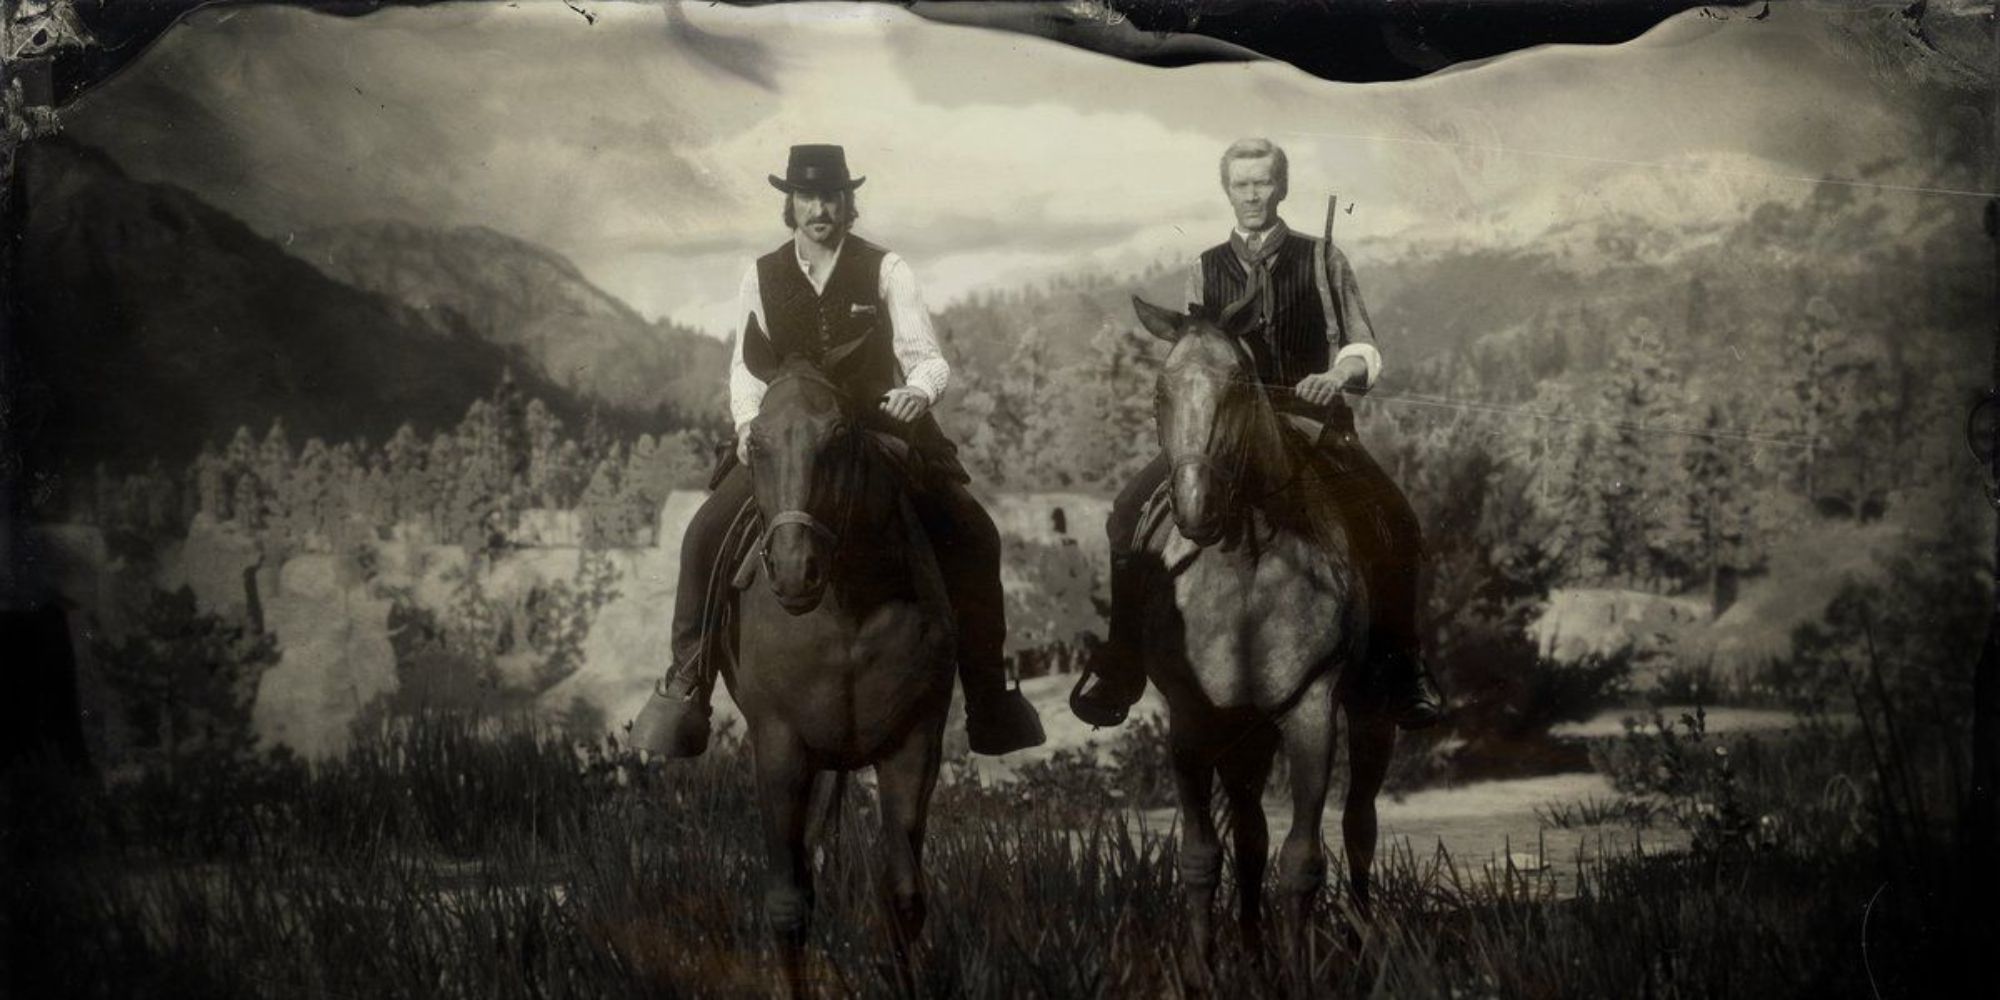 Red Dead Redemption 2 Black And White Picture Of Dutch and Hosea 